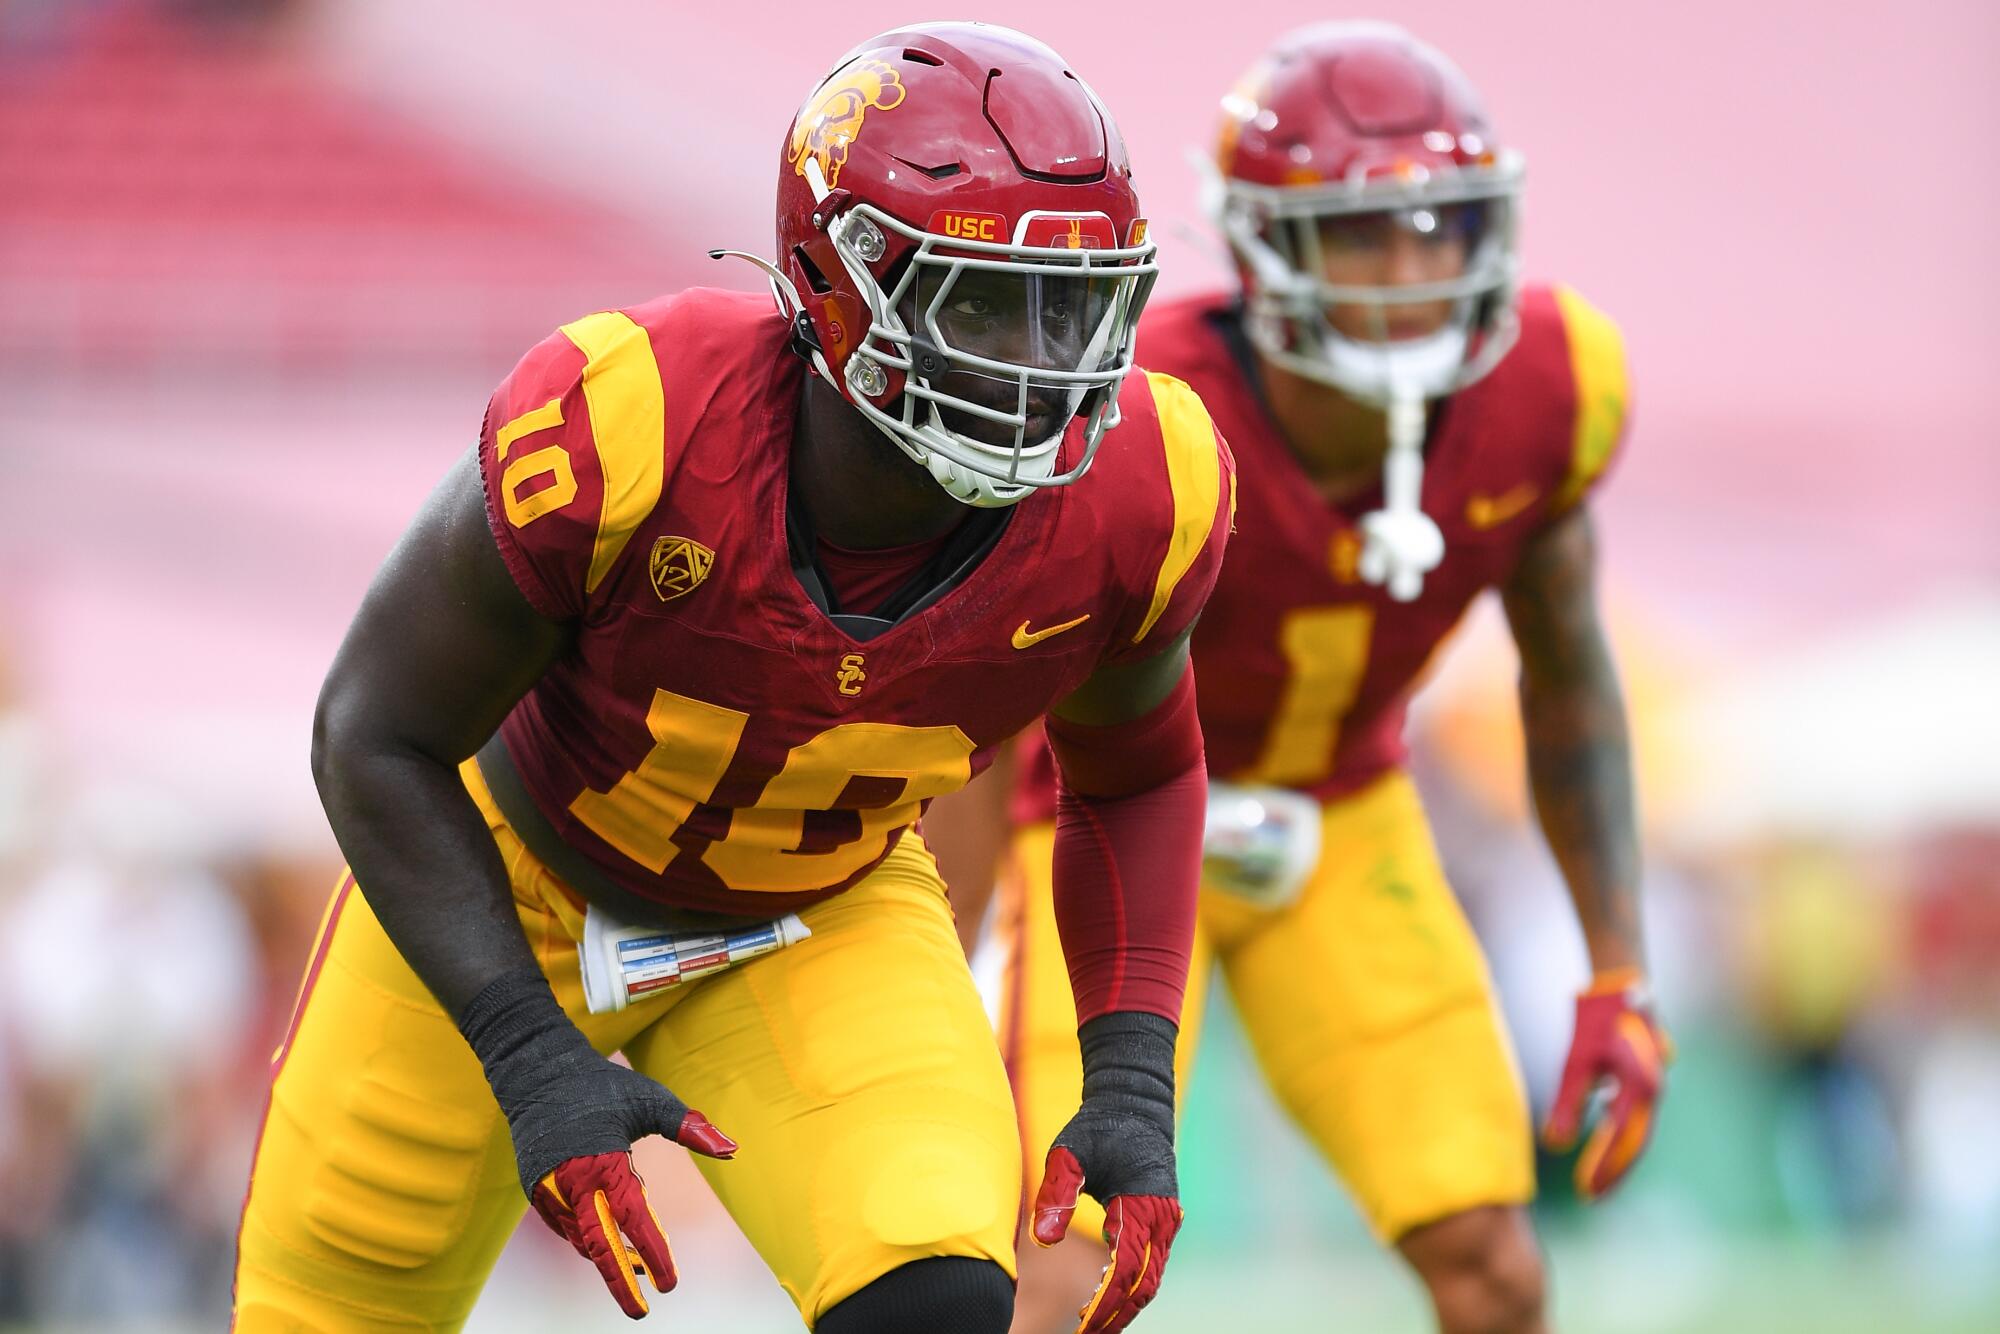 USC rush end Jamil Muhammad readies for a snap against Nevada at the Coliseum on Sept. 2.